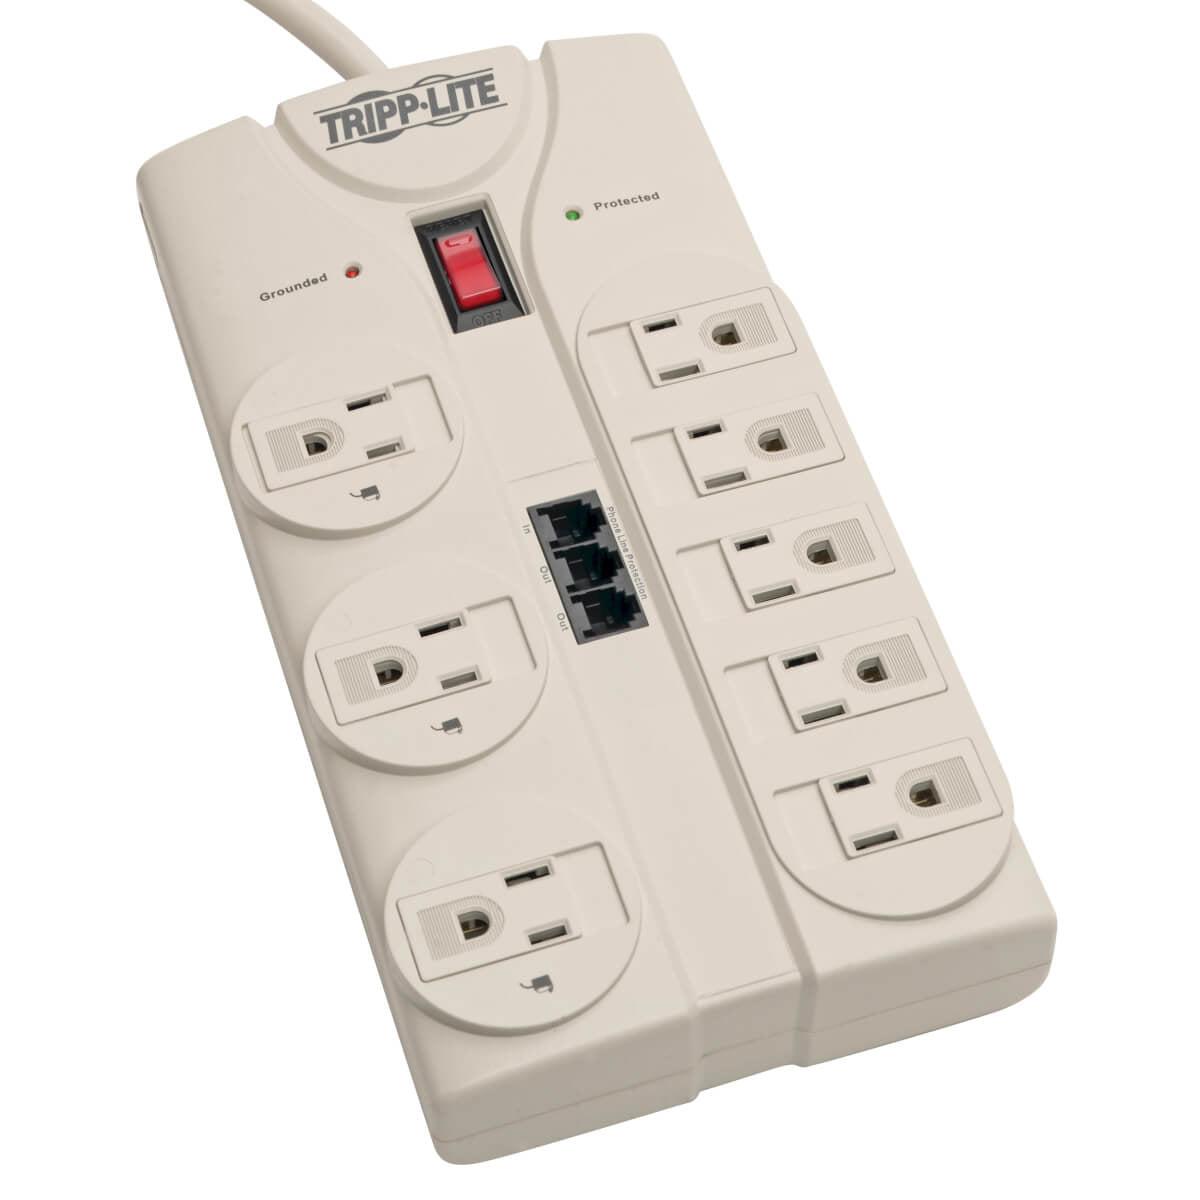 Tripp Lite Protect It! 8-Outlet Computer Surge Protector, 8-Ft. Cord, 2160 Joules, Tel/Modem/Fax Protection